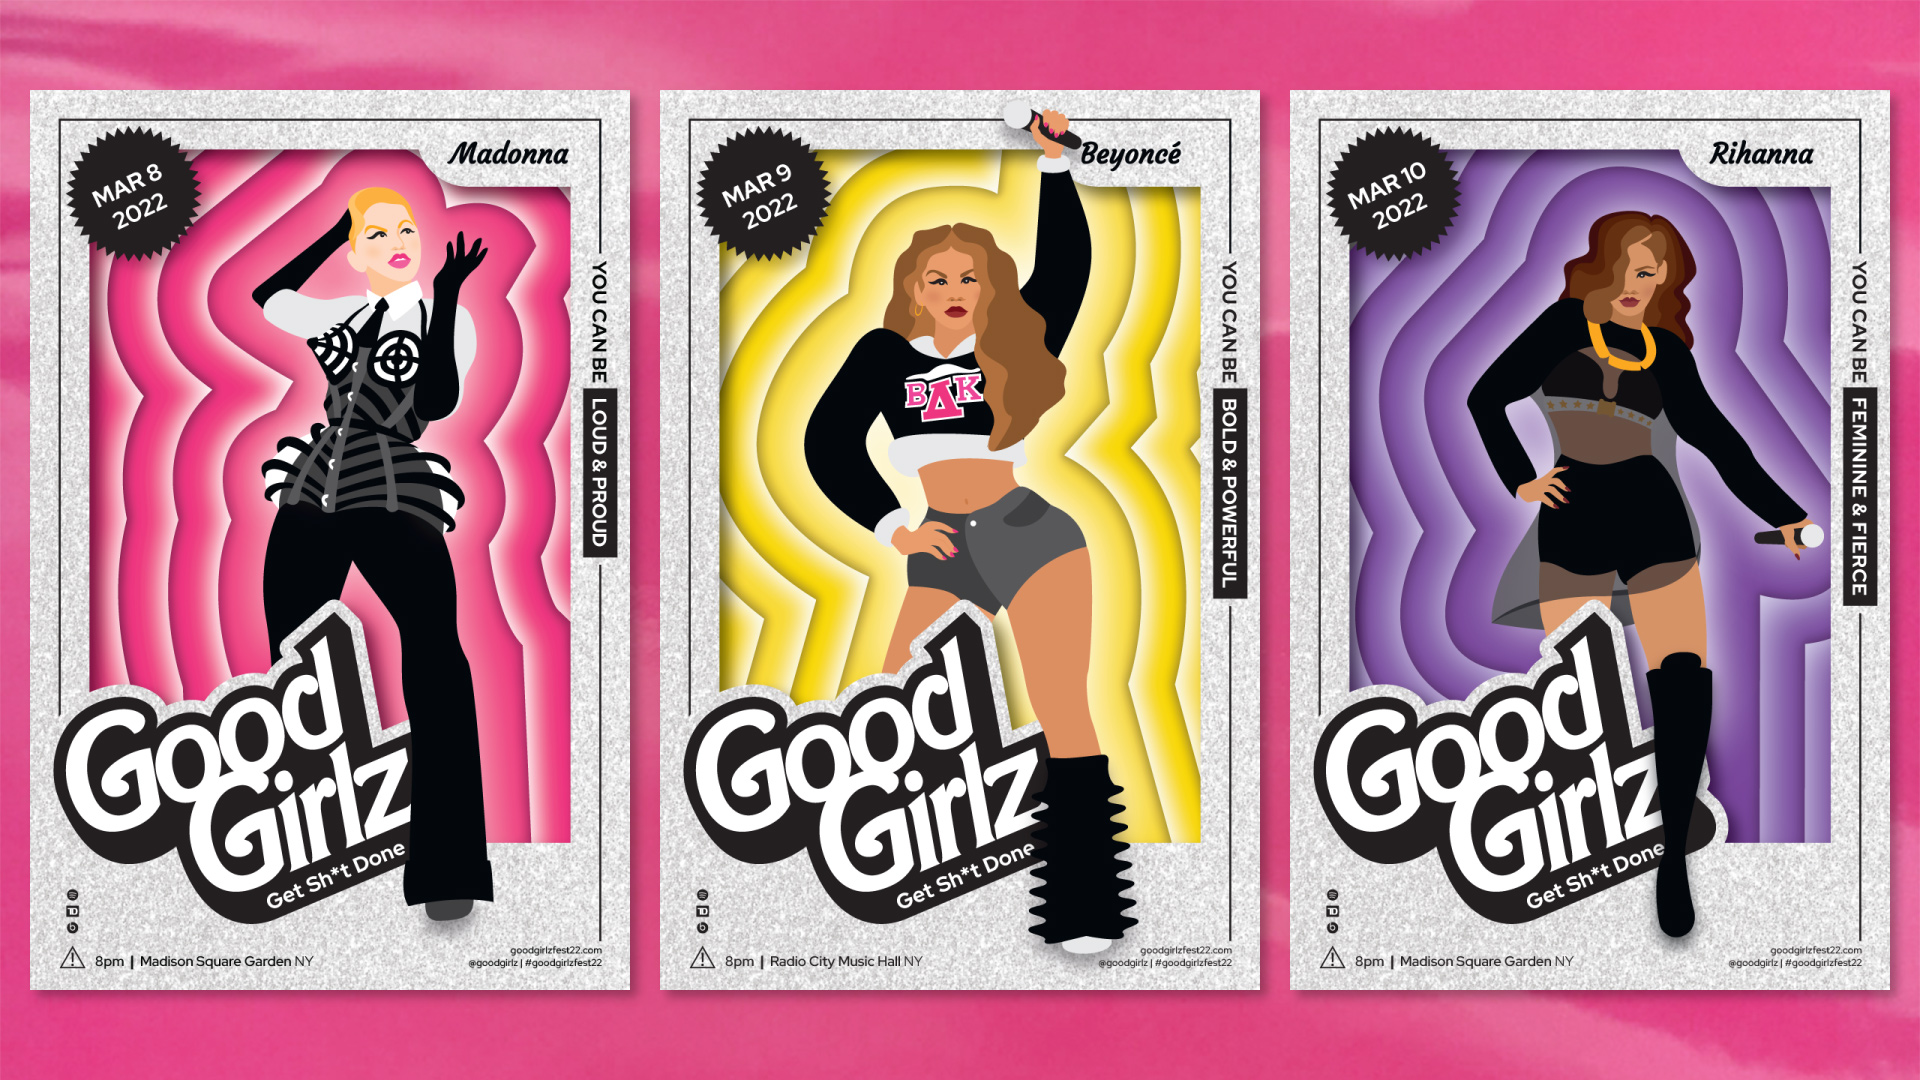 Three music festival poster designs for Good Girlz Music Fest featuring individual illustrations of Madonna (left), Rihanna (center) and Beyonce (right).